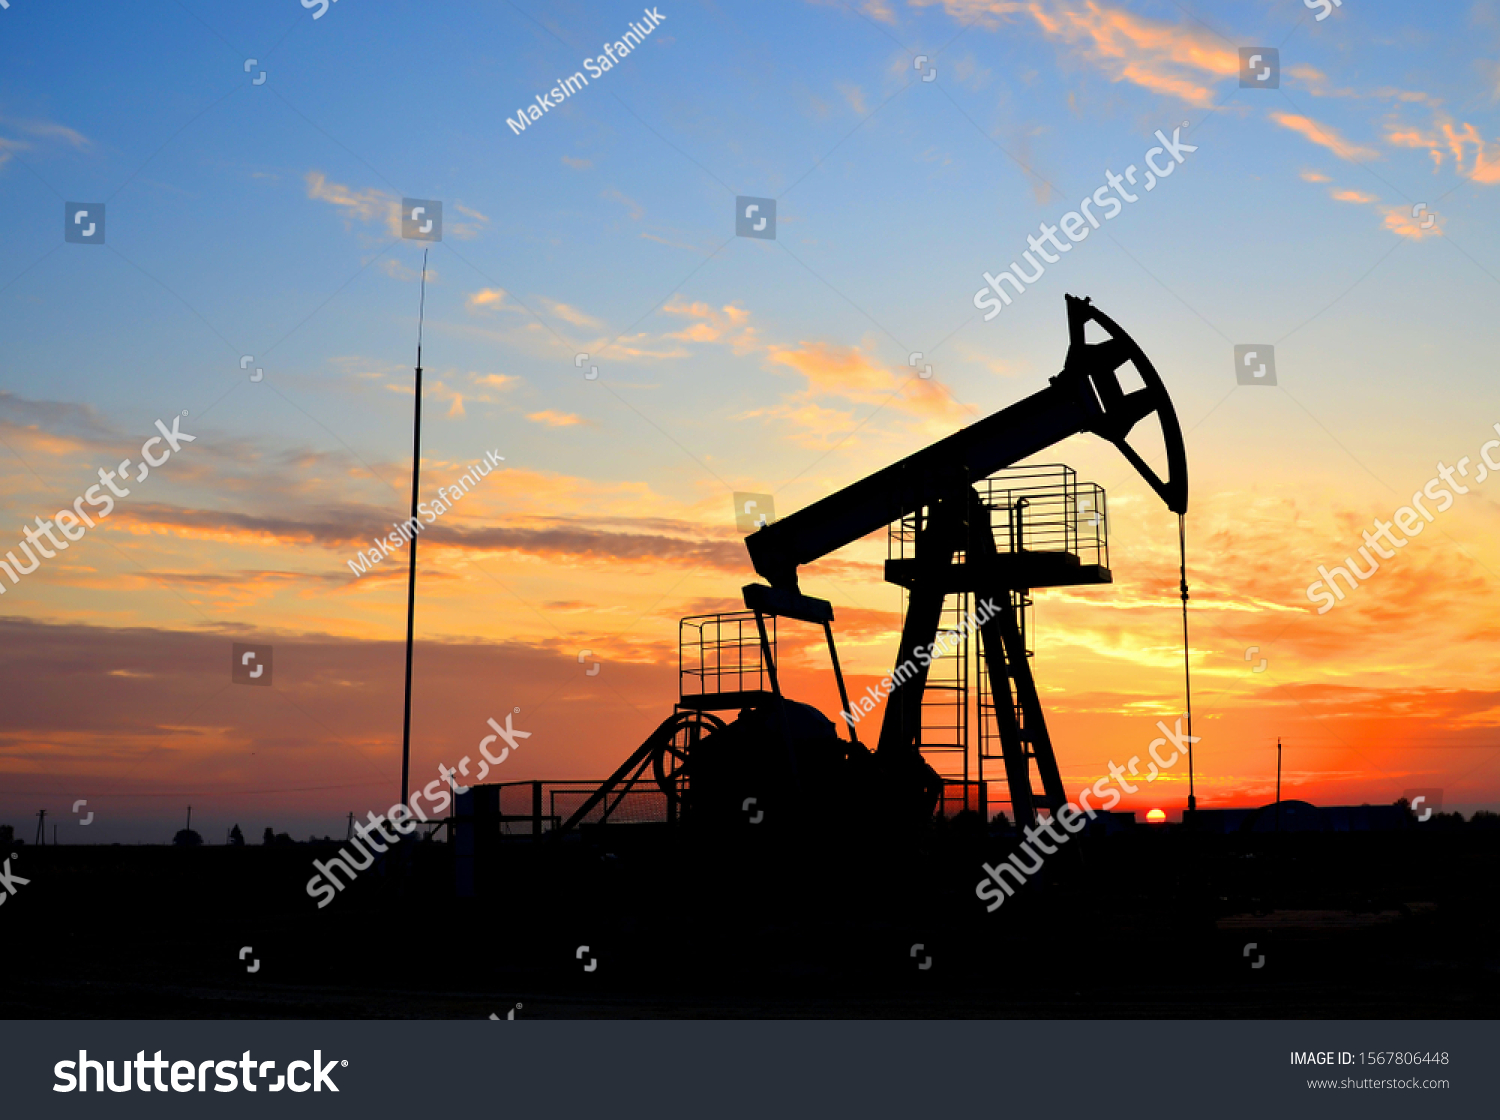 Oil drilling derricks at desert oilfield for fossil fuels output and crude oil production from the ground. Oil drill rig and pump jack background, texture. Belarus, Rechitsa region #1567806448